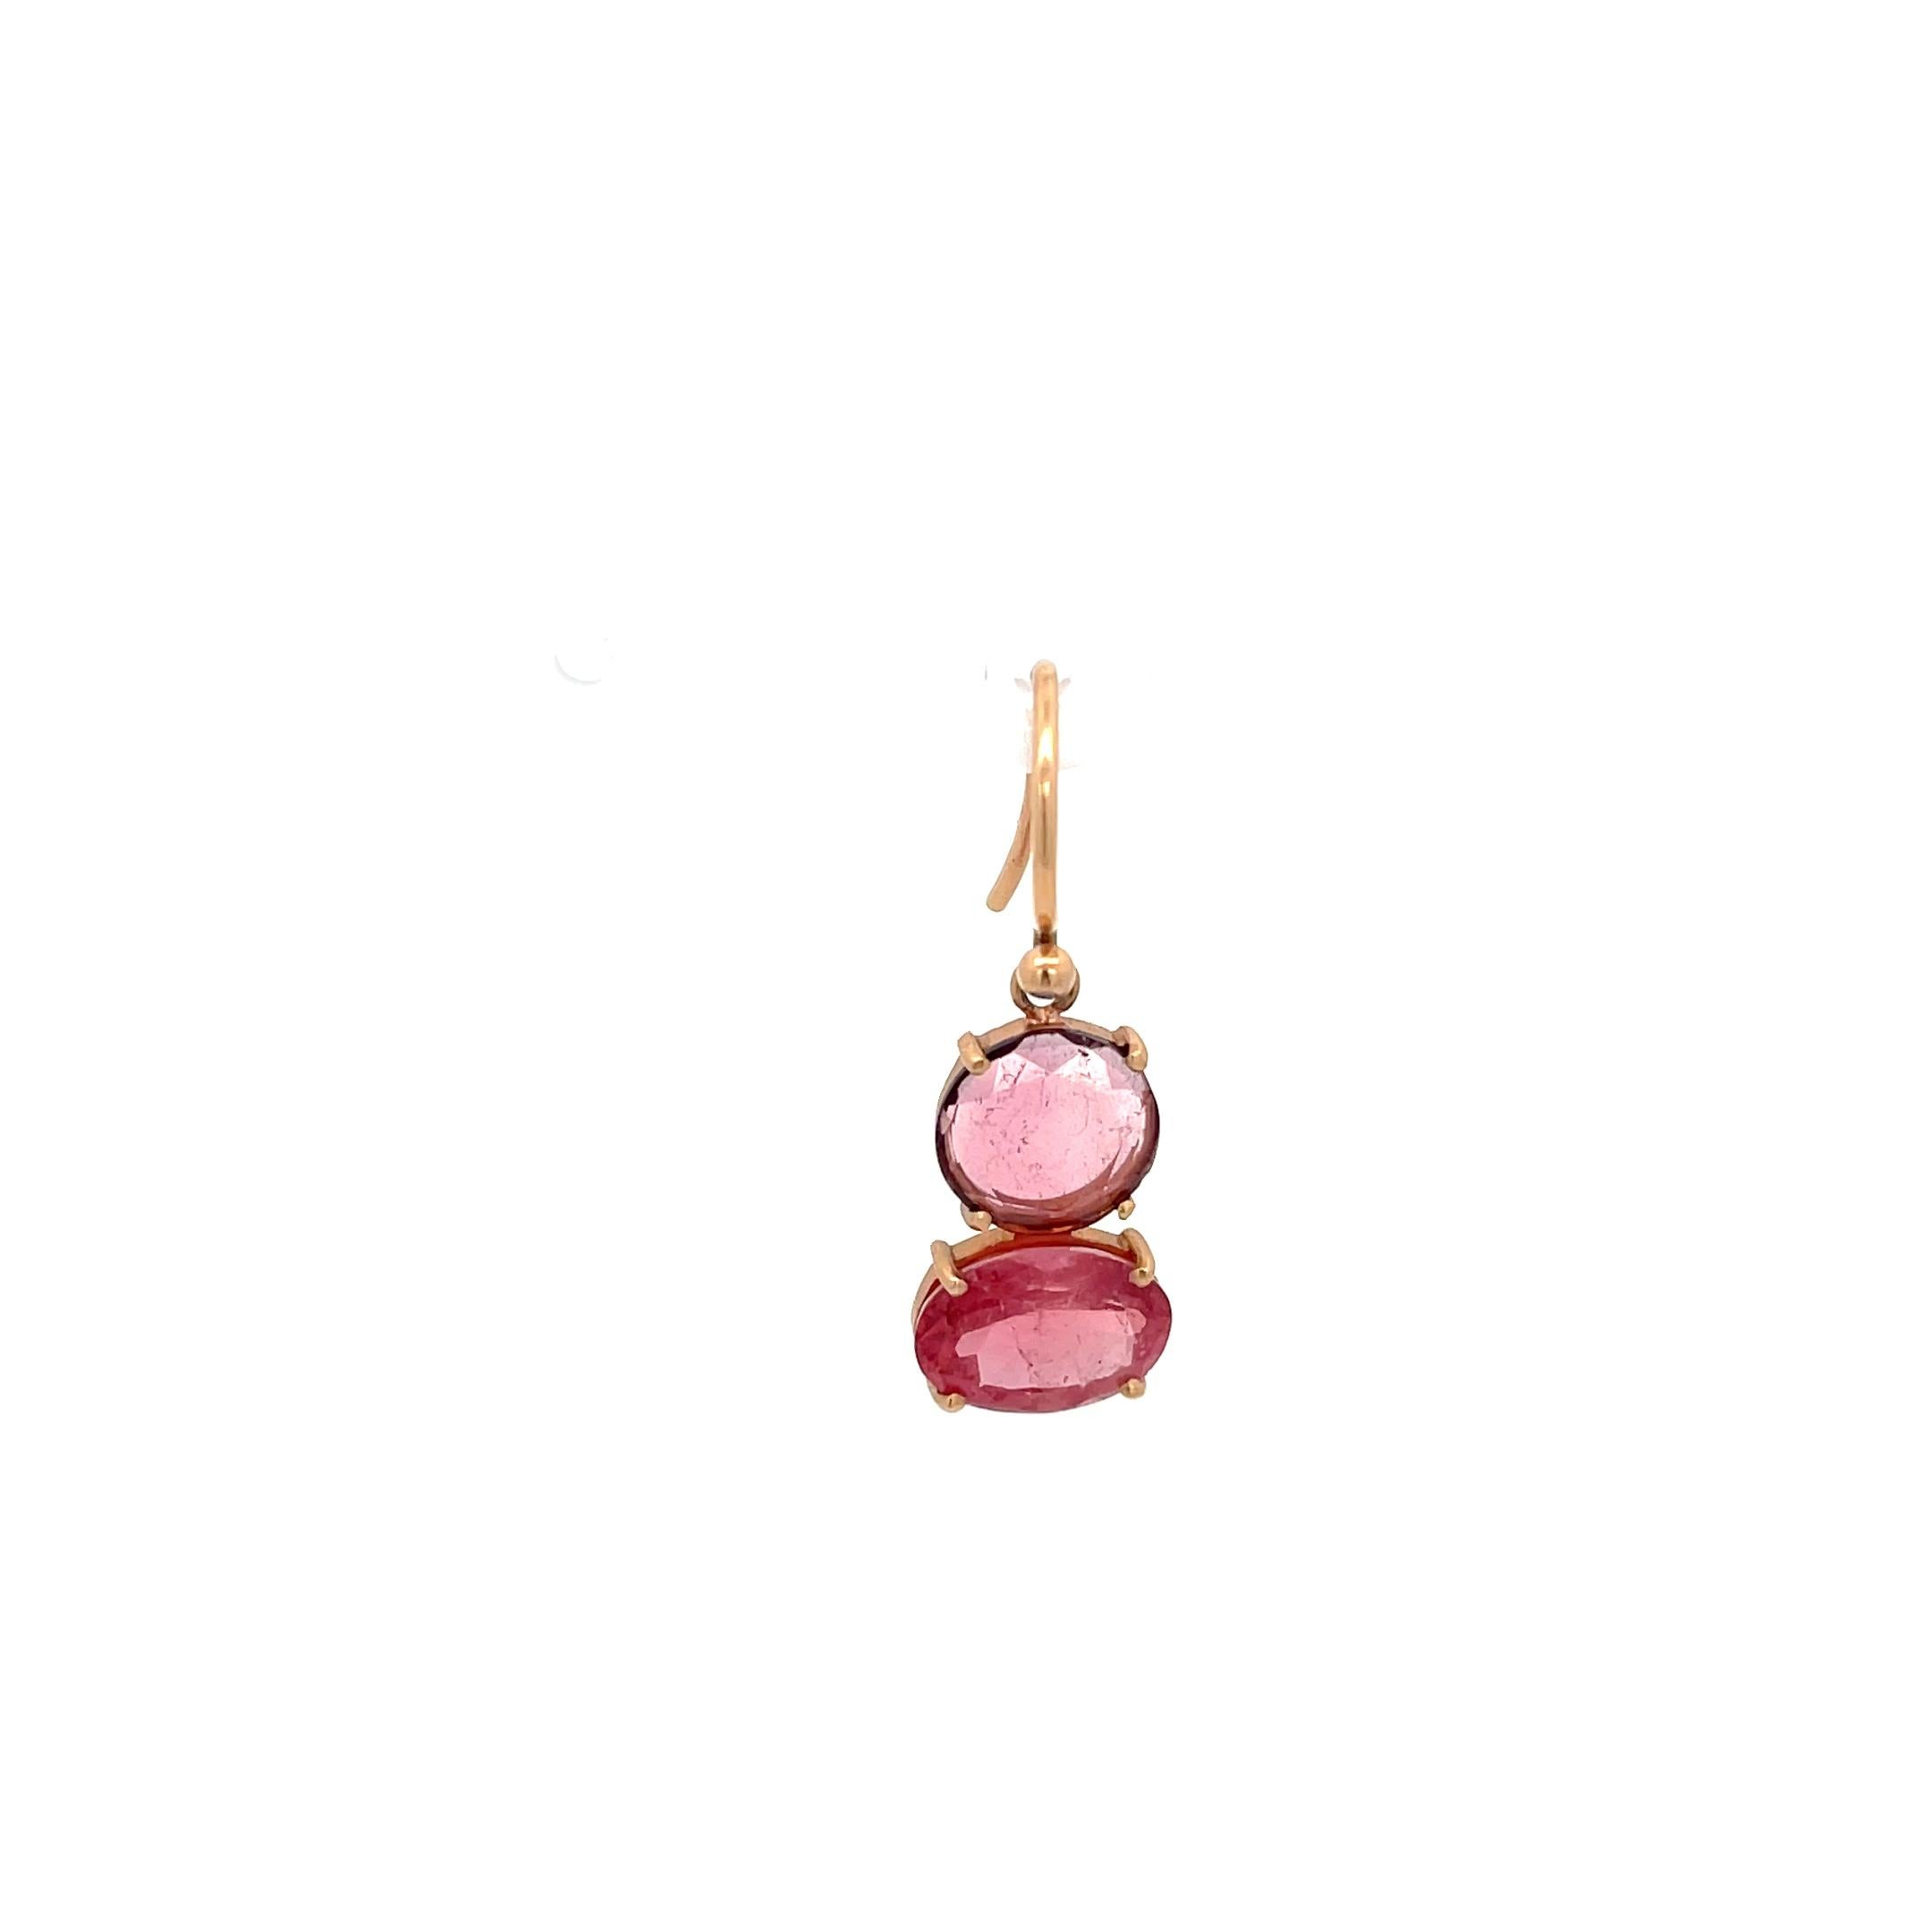 Contemporary Irene Neuwirth Double Tourmaline Single Earring 18K Rose Gold For Sale